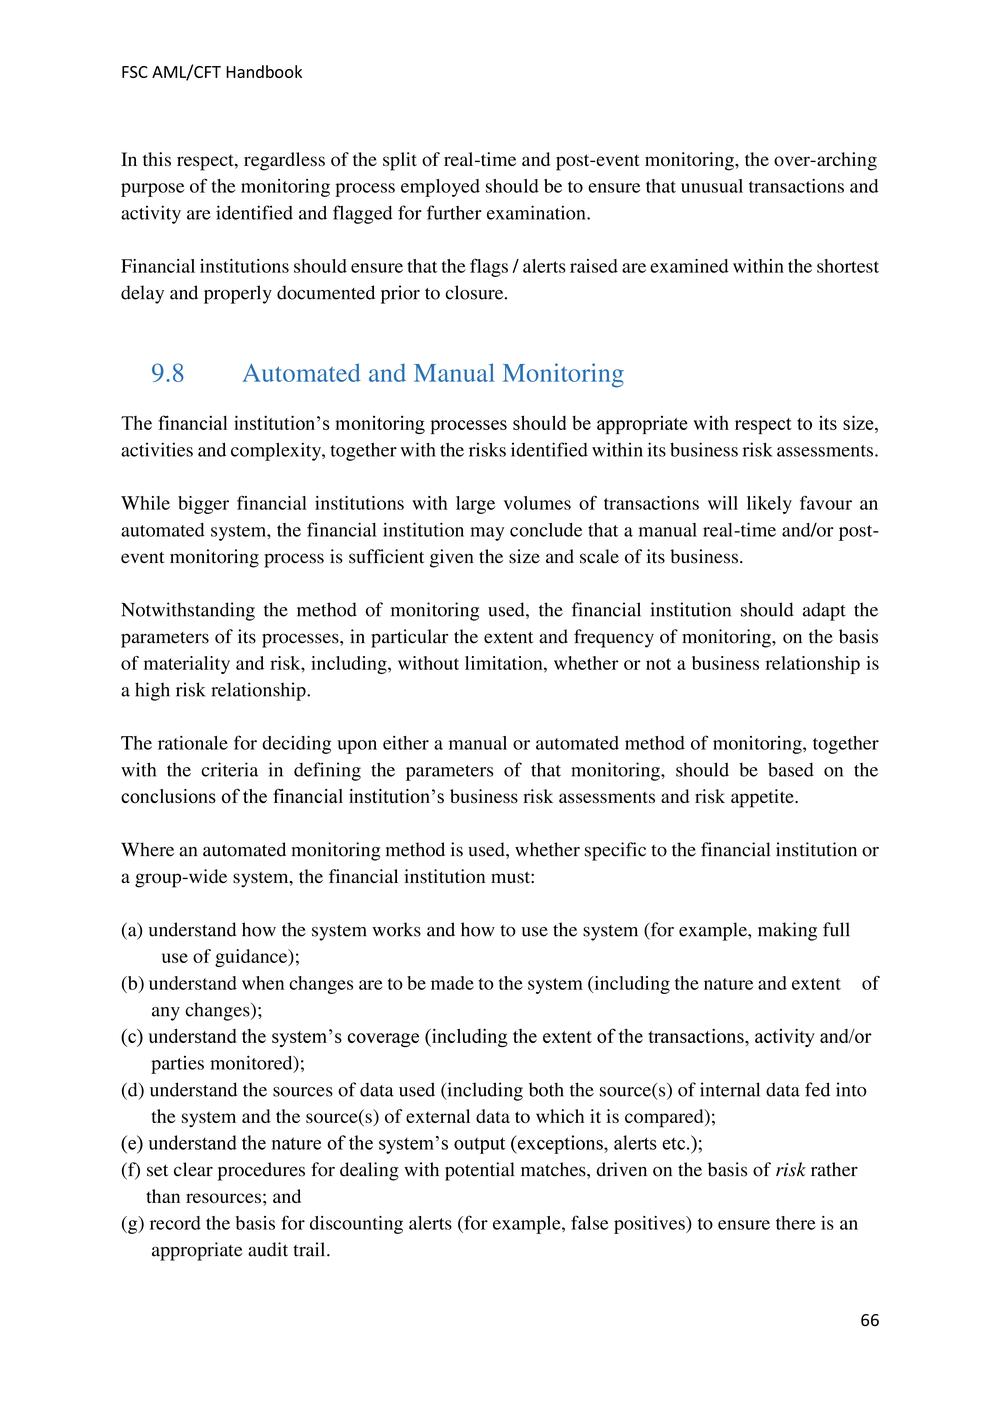 ANTI-MONEY LAUNDERING AND COUNTERING THE FINANCING OF TERRORISM HANDBOOK - FSC